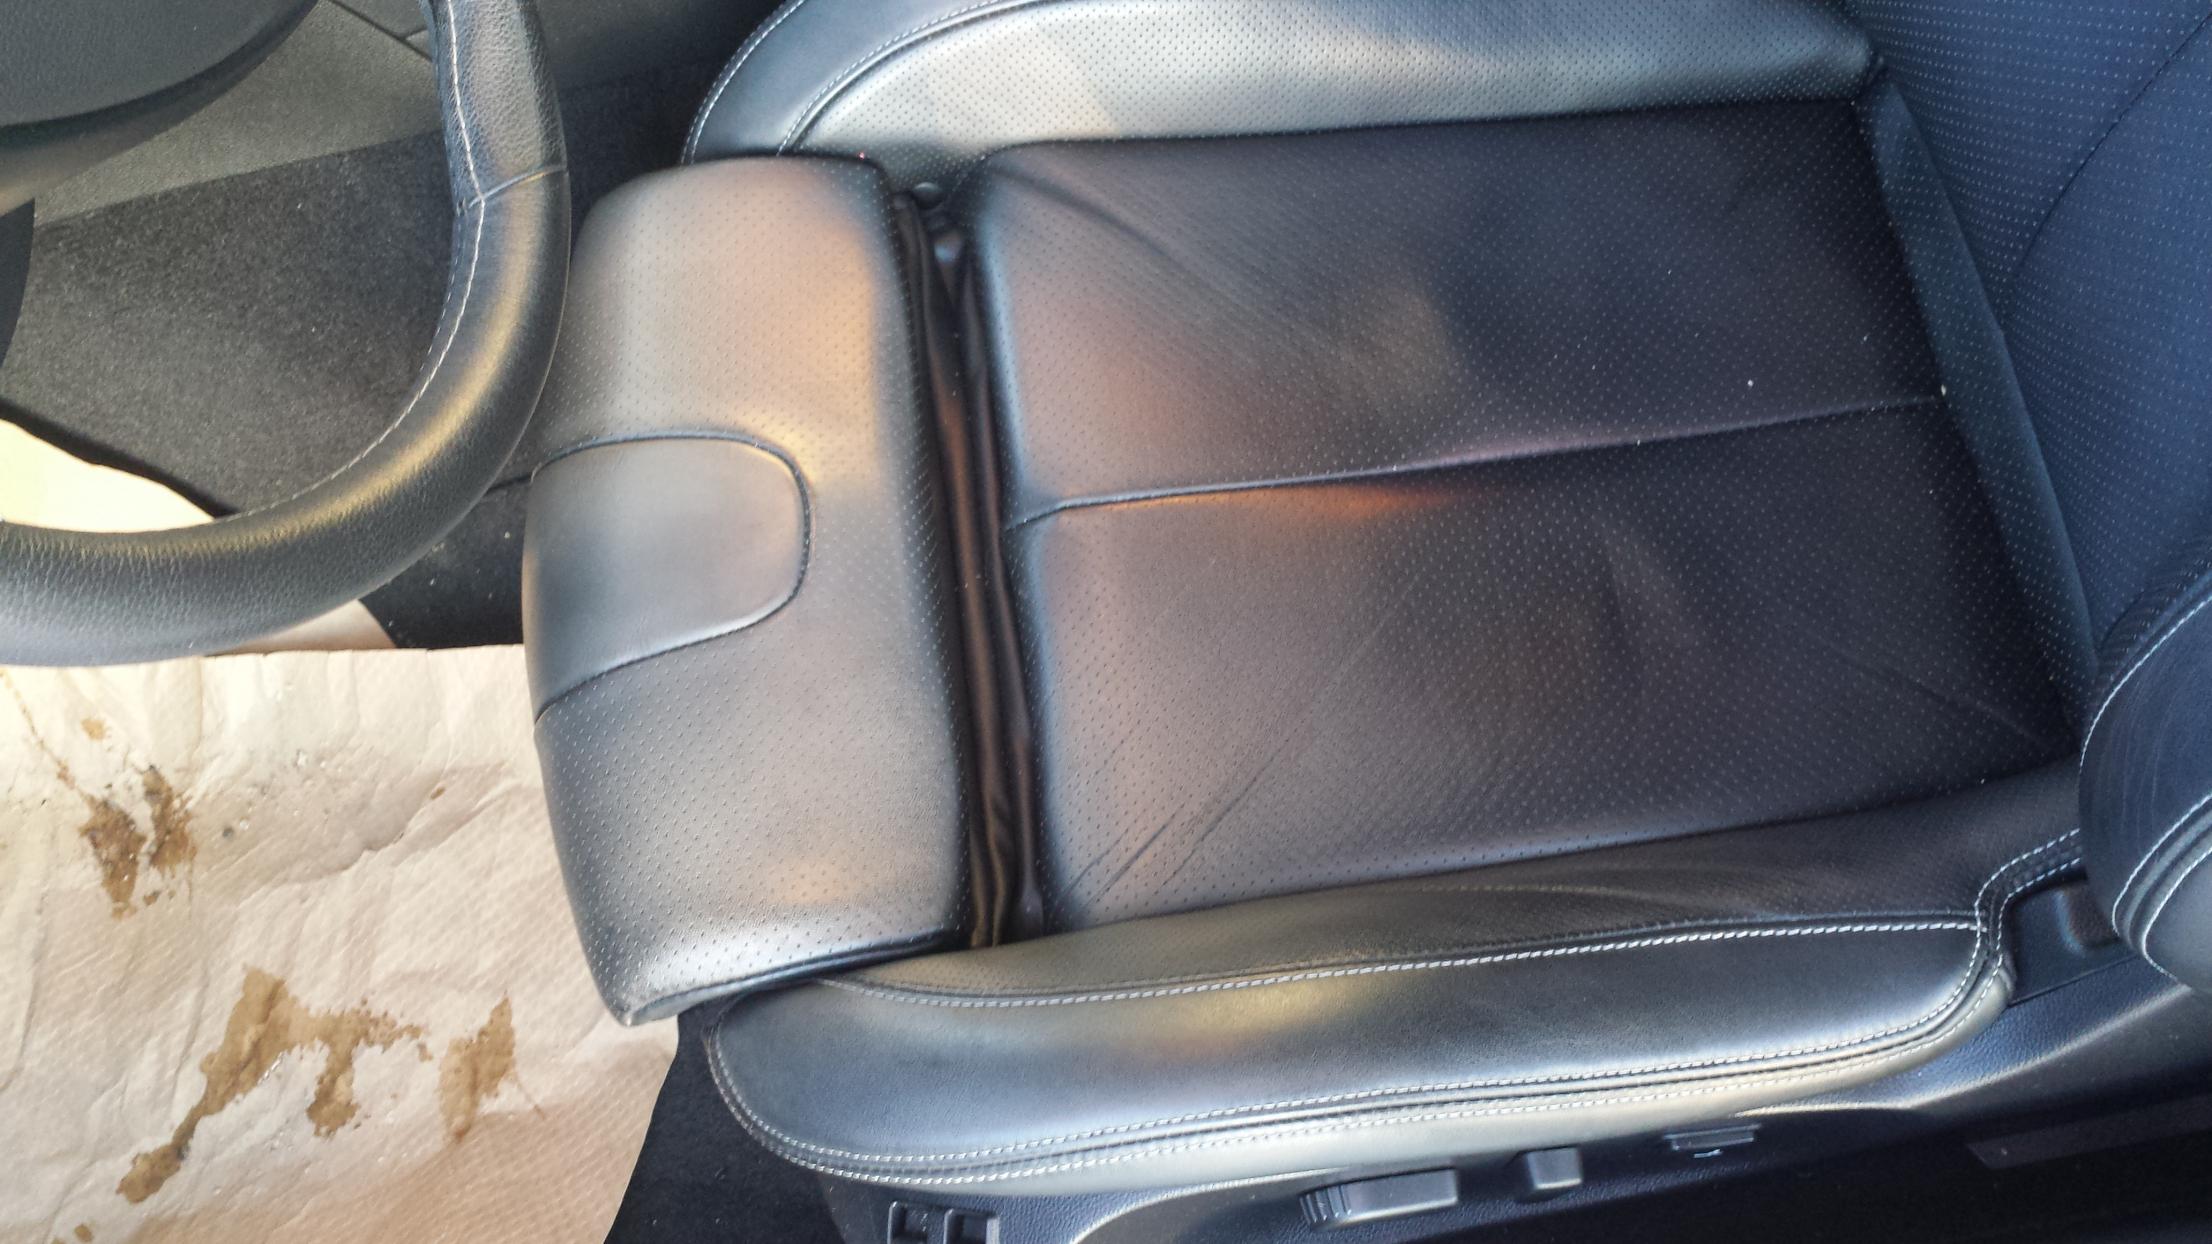 Leather Interior Discoloration? - MyG37